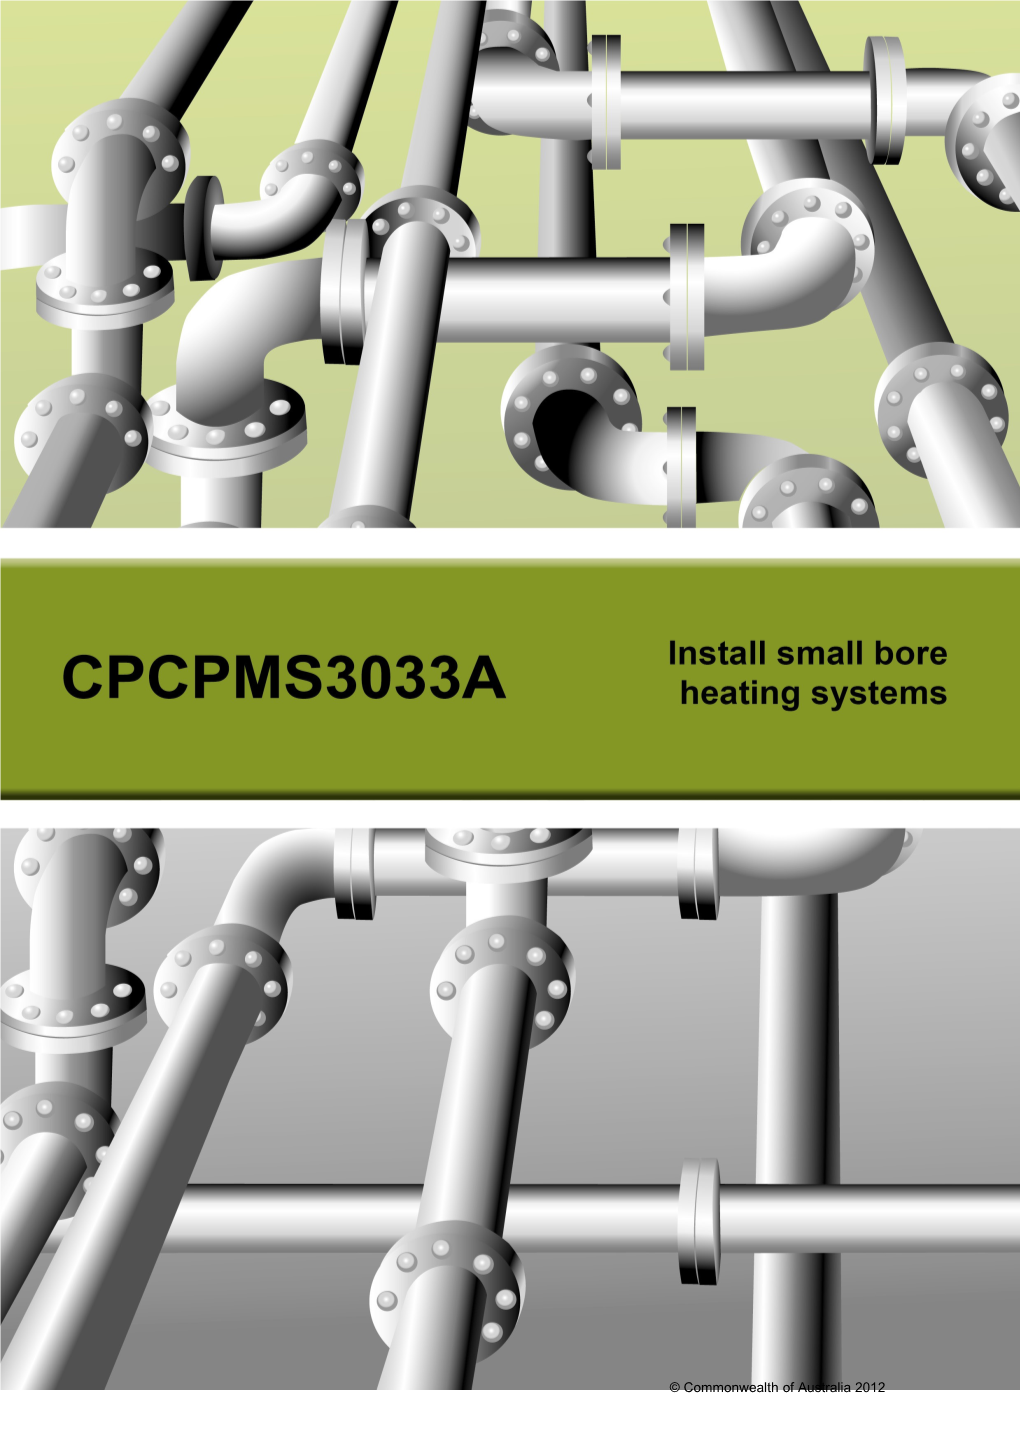 Cpcpms3033a - Install Small Bore Heating Systems